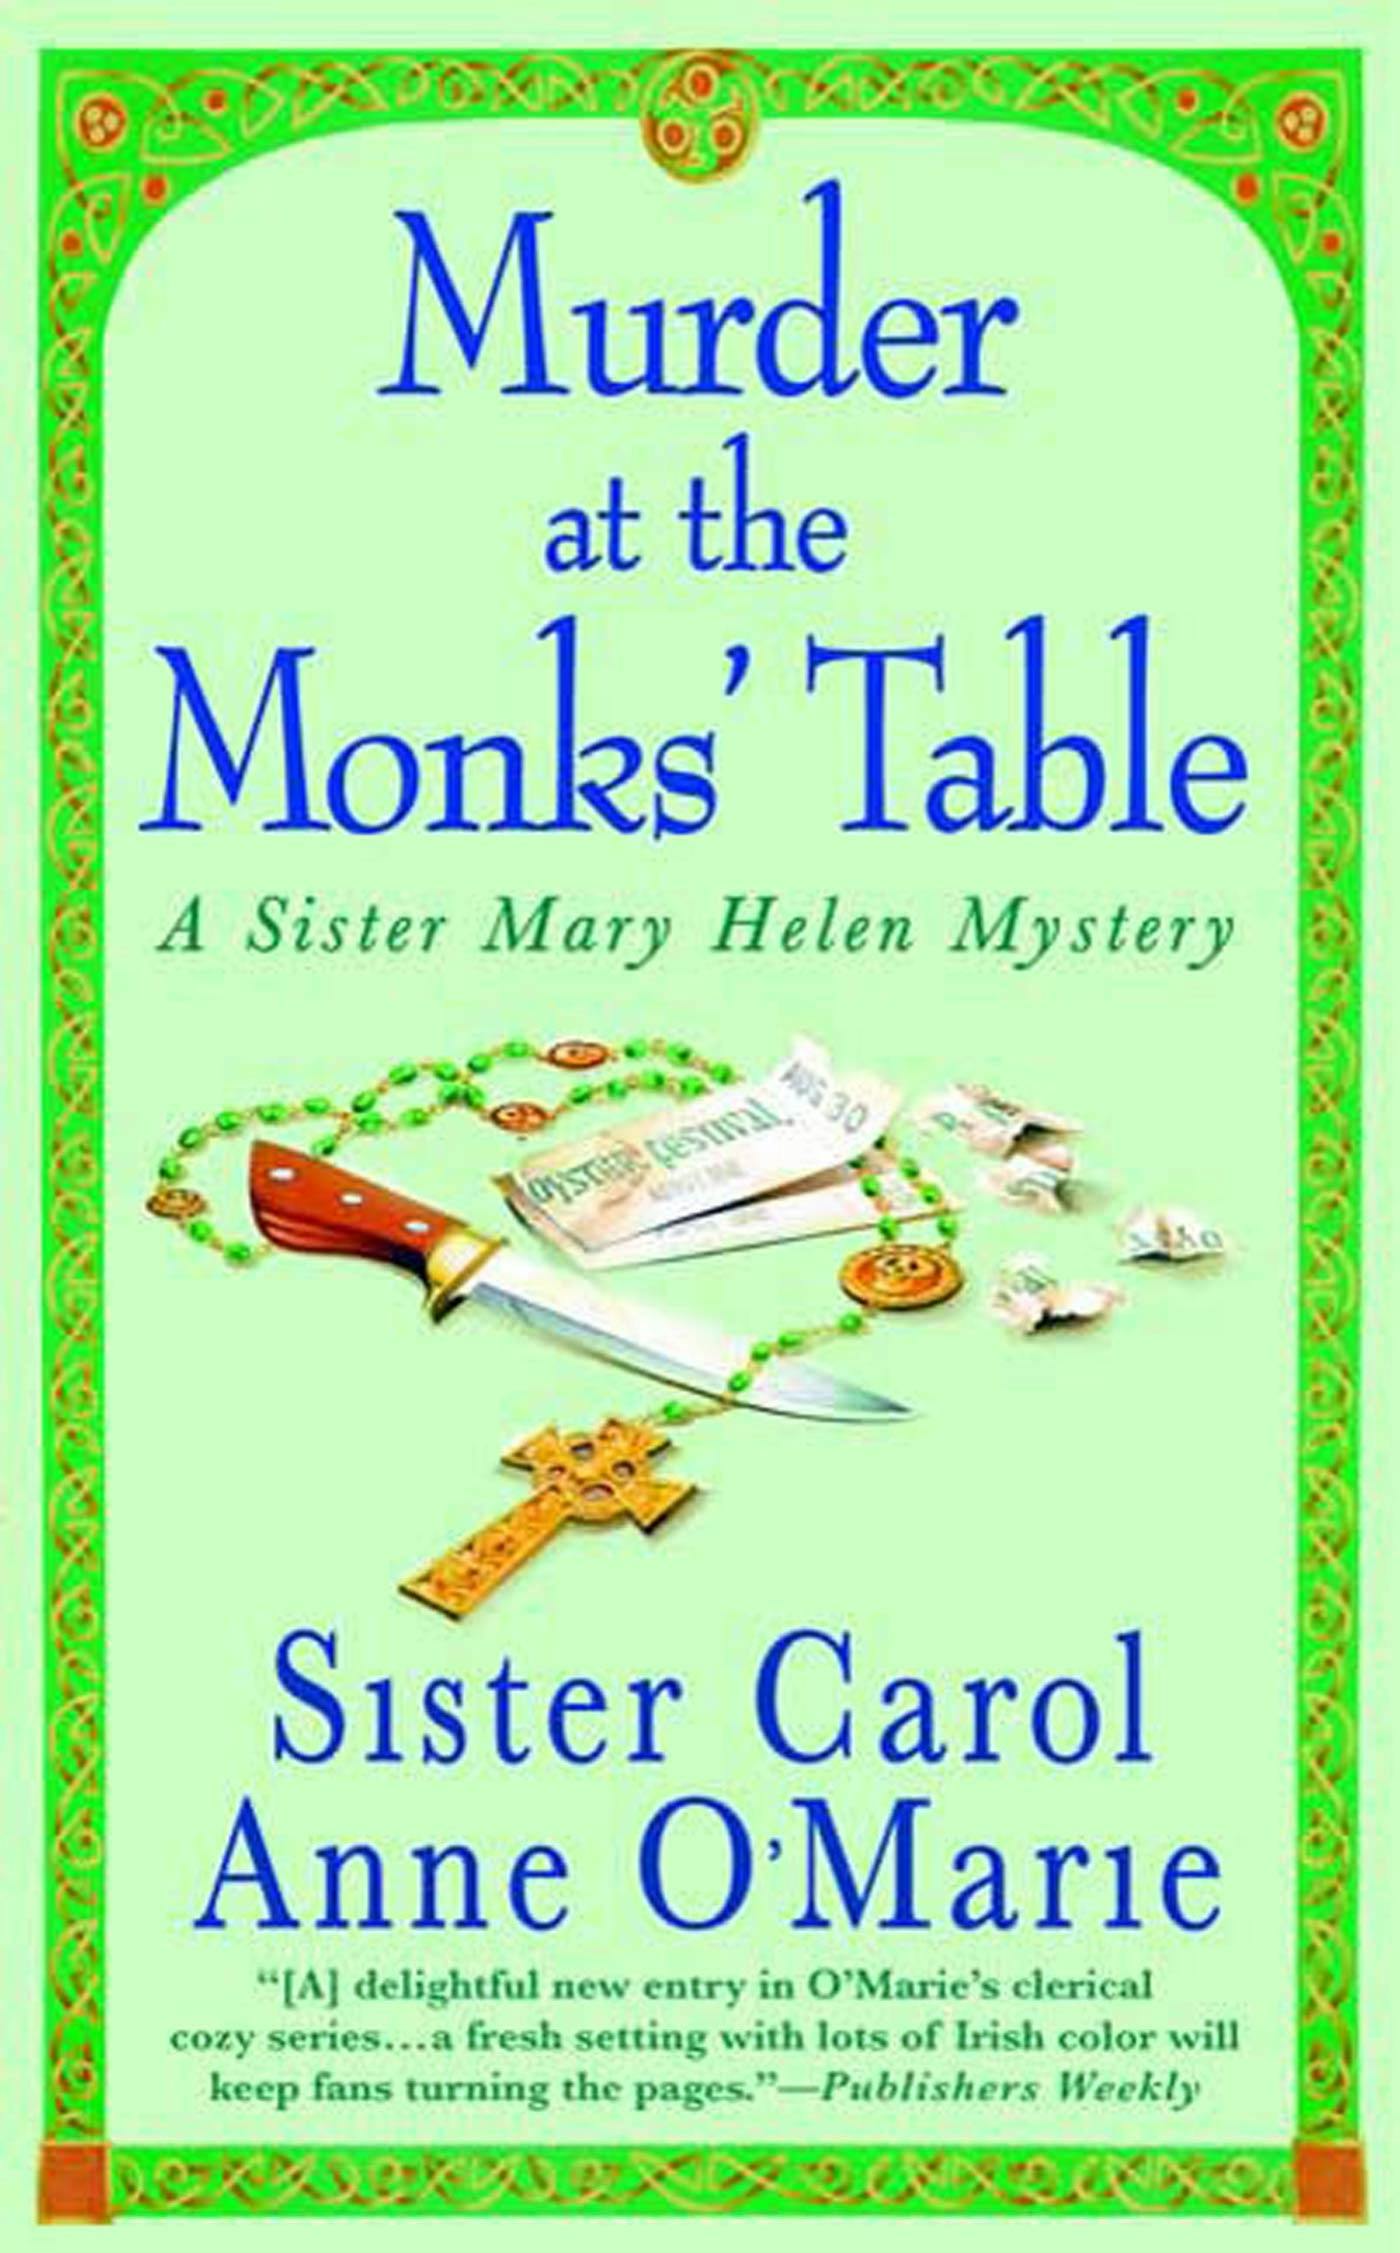 Image of Murder at the Monks' Table